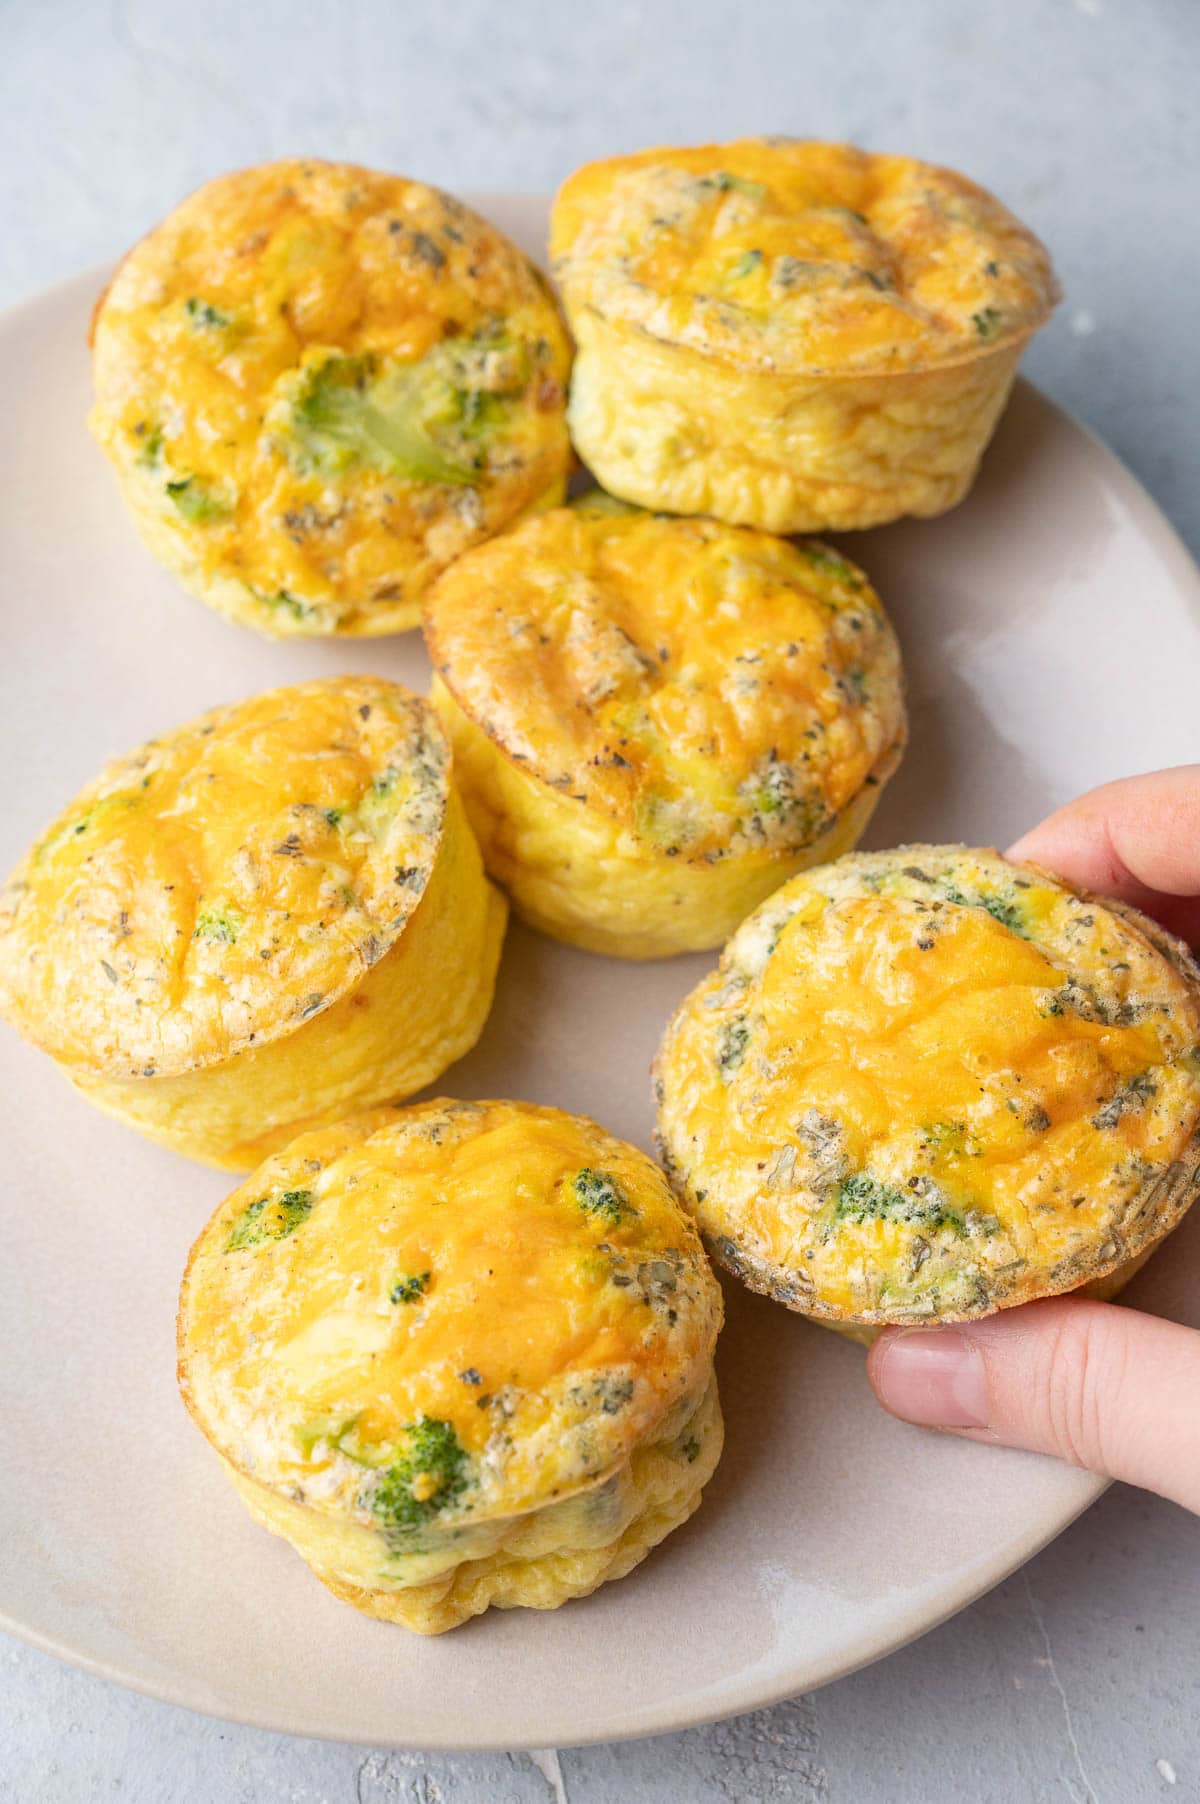 https://www.everyday-delicious.com/wp-content/uploads/2022/03/broccoli-cheddar-egg-muffins-everyday-delicious-2.jpg